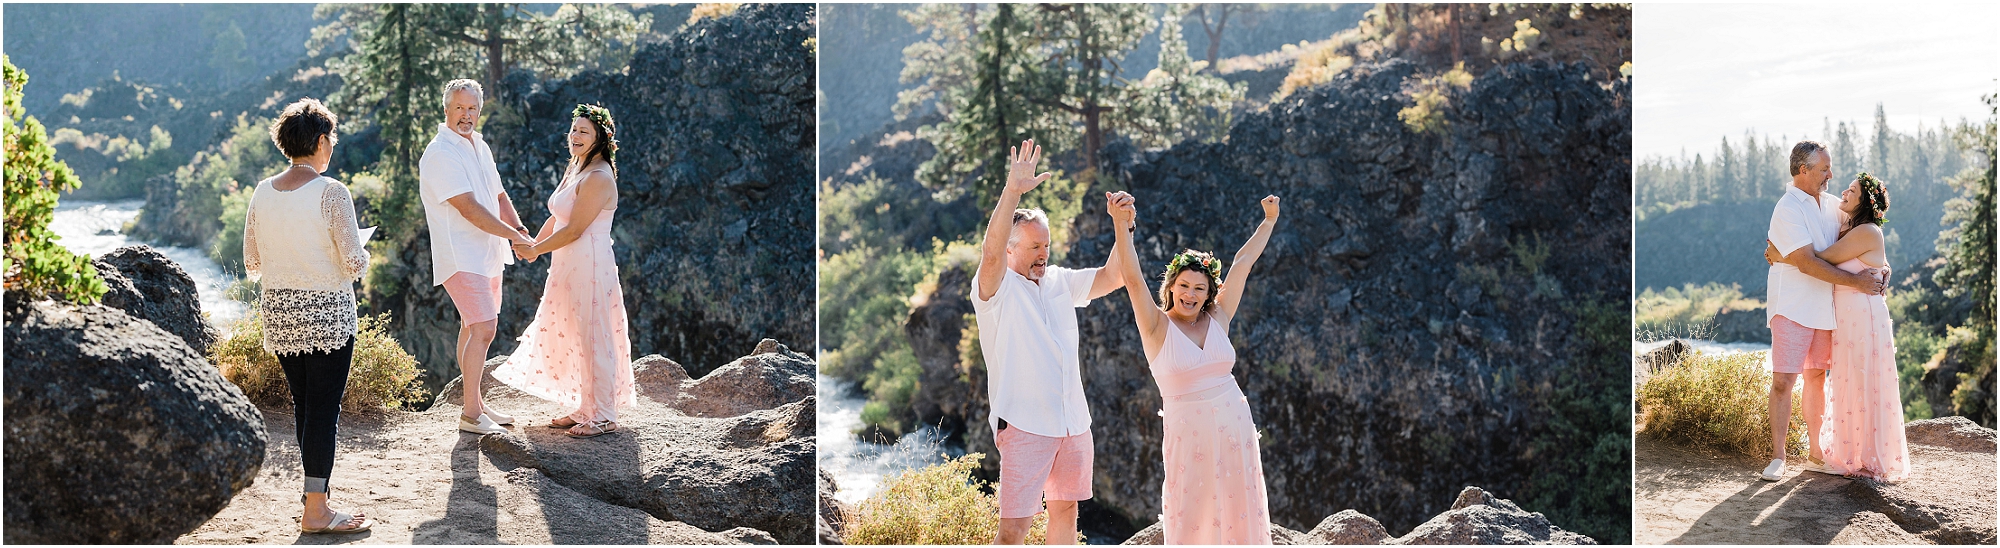 A bride wearing a pink dress and floral crown stands with her groom in pink shorts as they say their vows above the Deschutes River when they elope in Bend Oregon. | Erica Swantek Photography